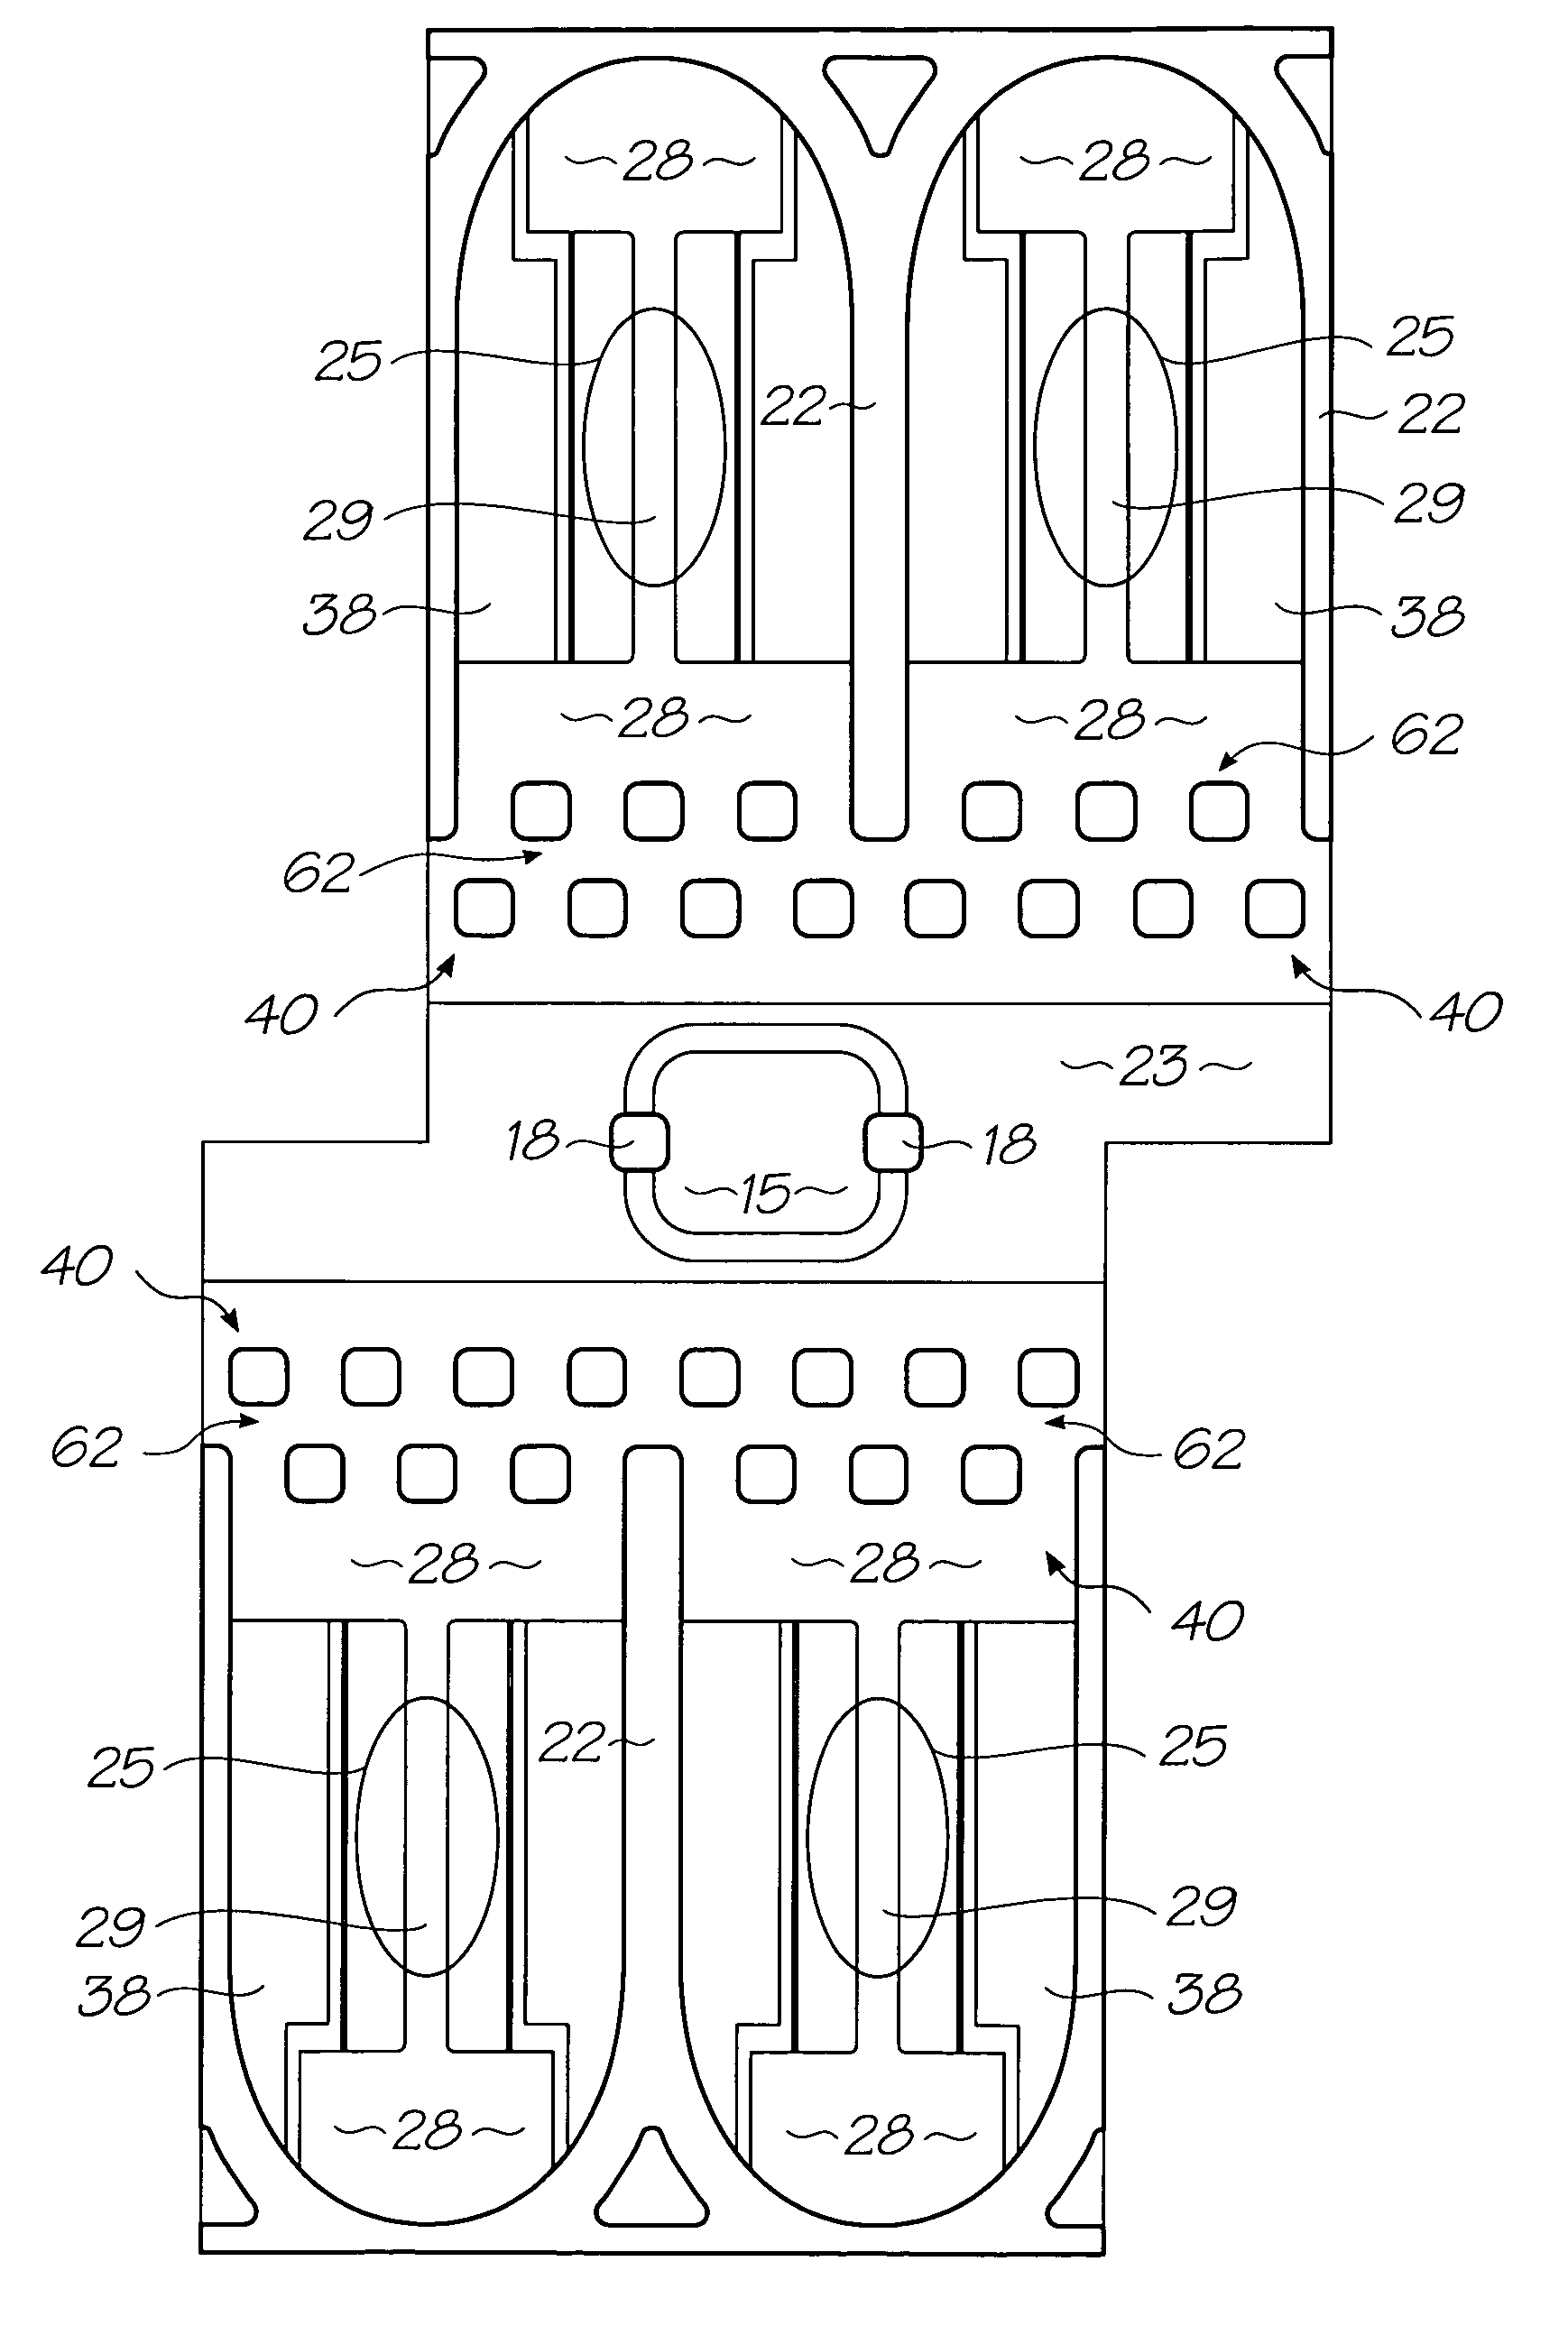 Inkjet printhead with inlet priming feature